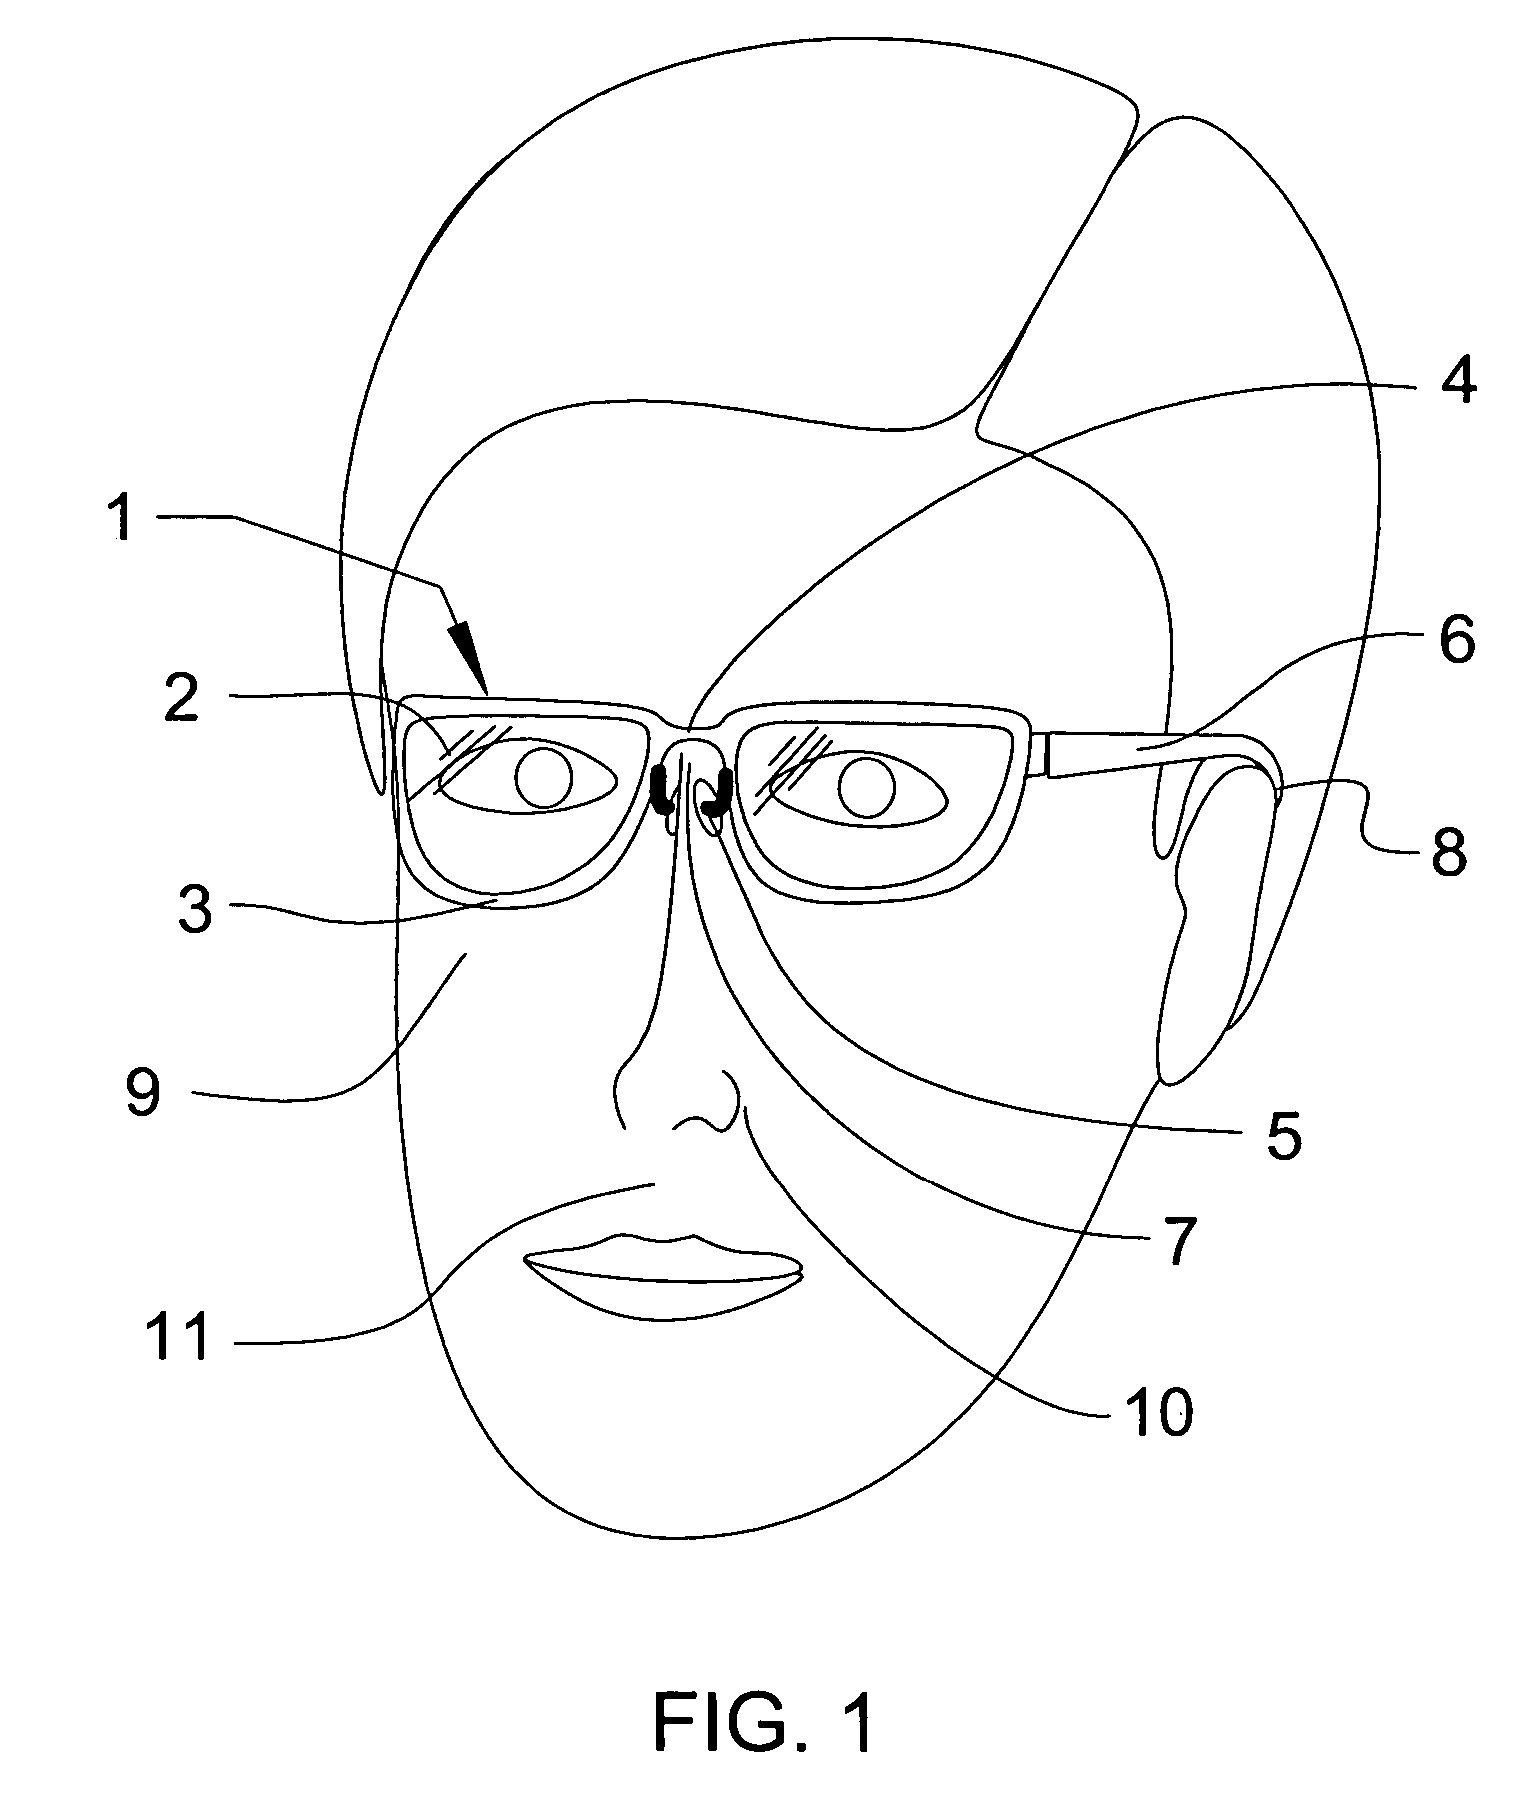 Eyeglasses with alternative supports